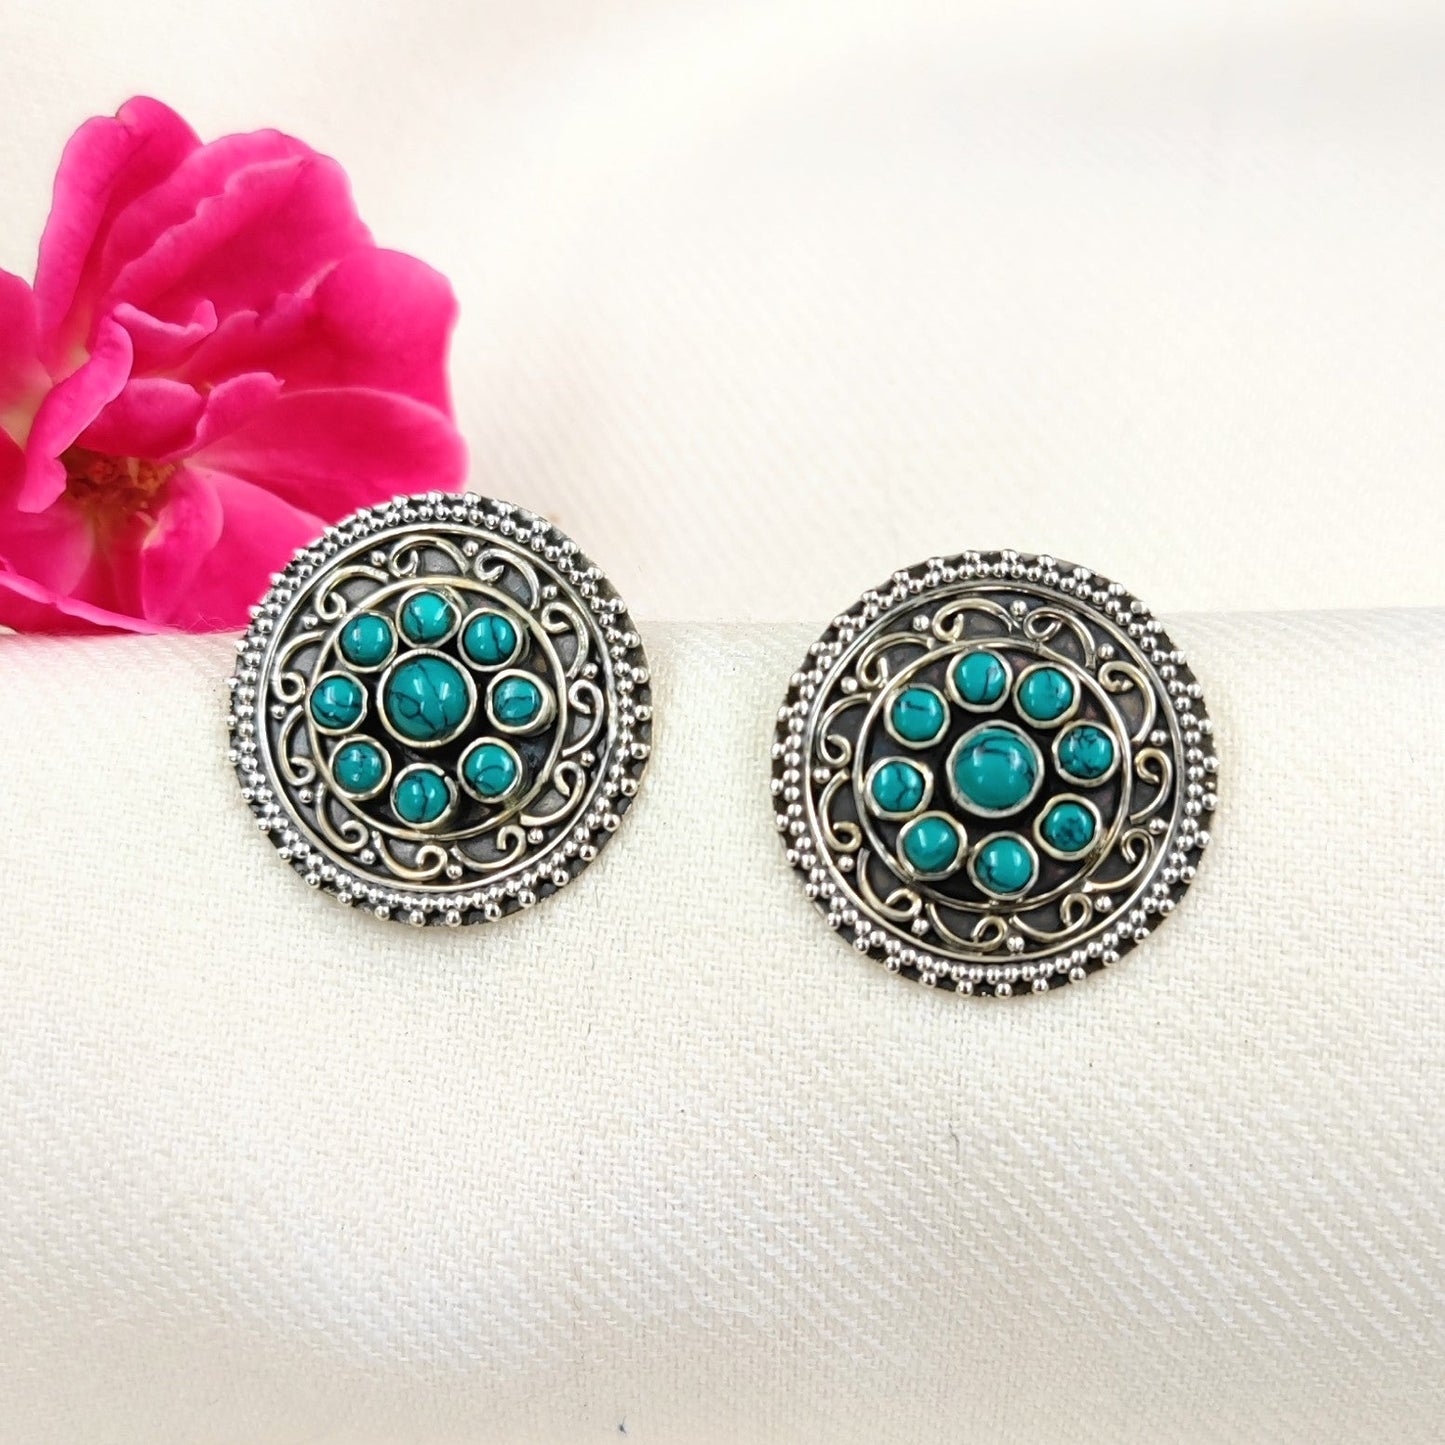 Silver Jewelry Earrings by Jauhri 92.5 Silver - Turquoise Jhilmil Studs